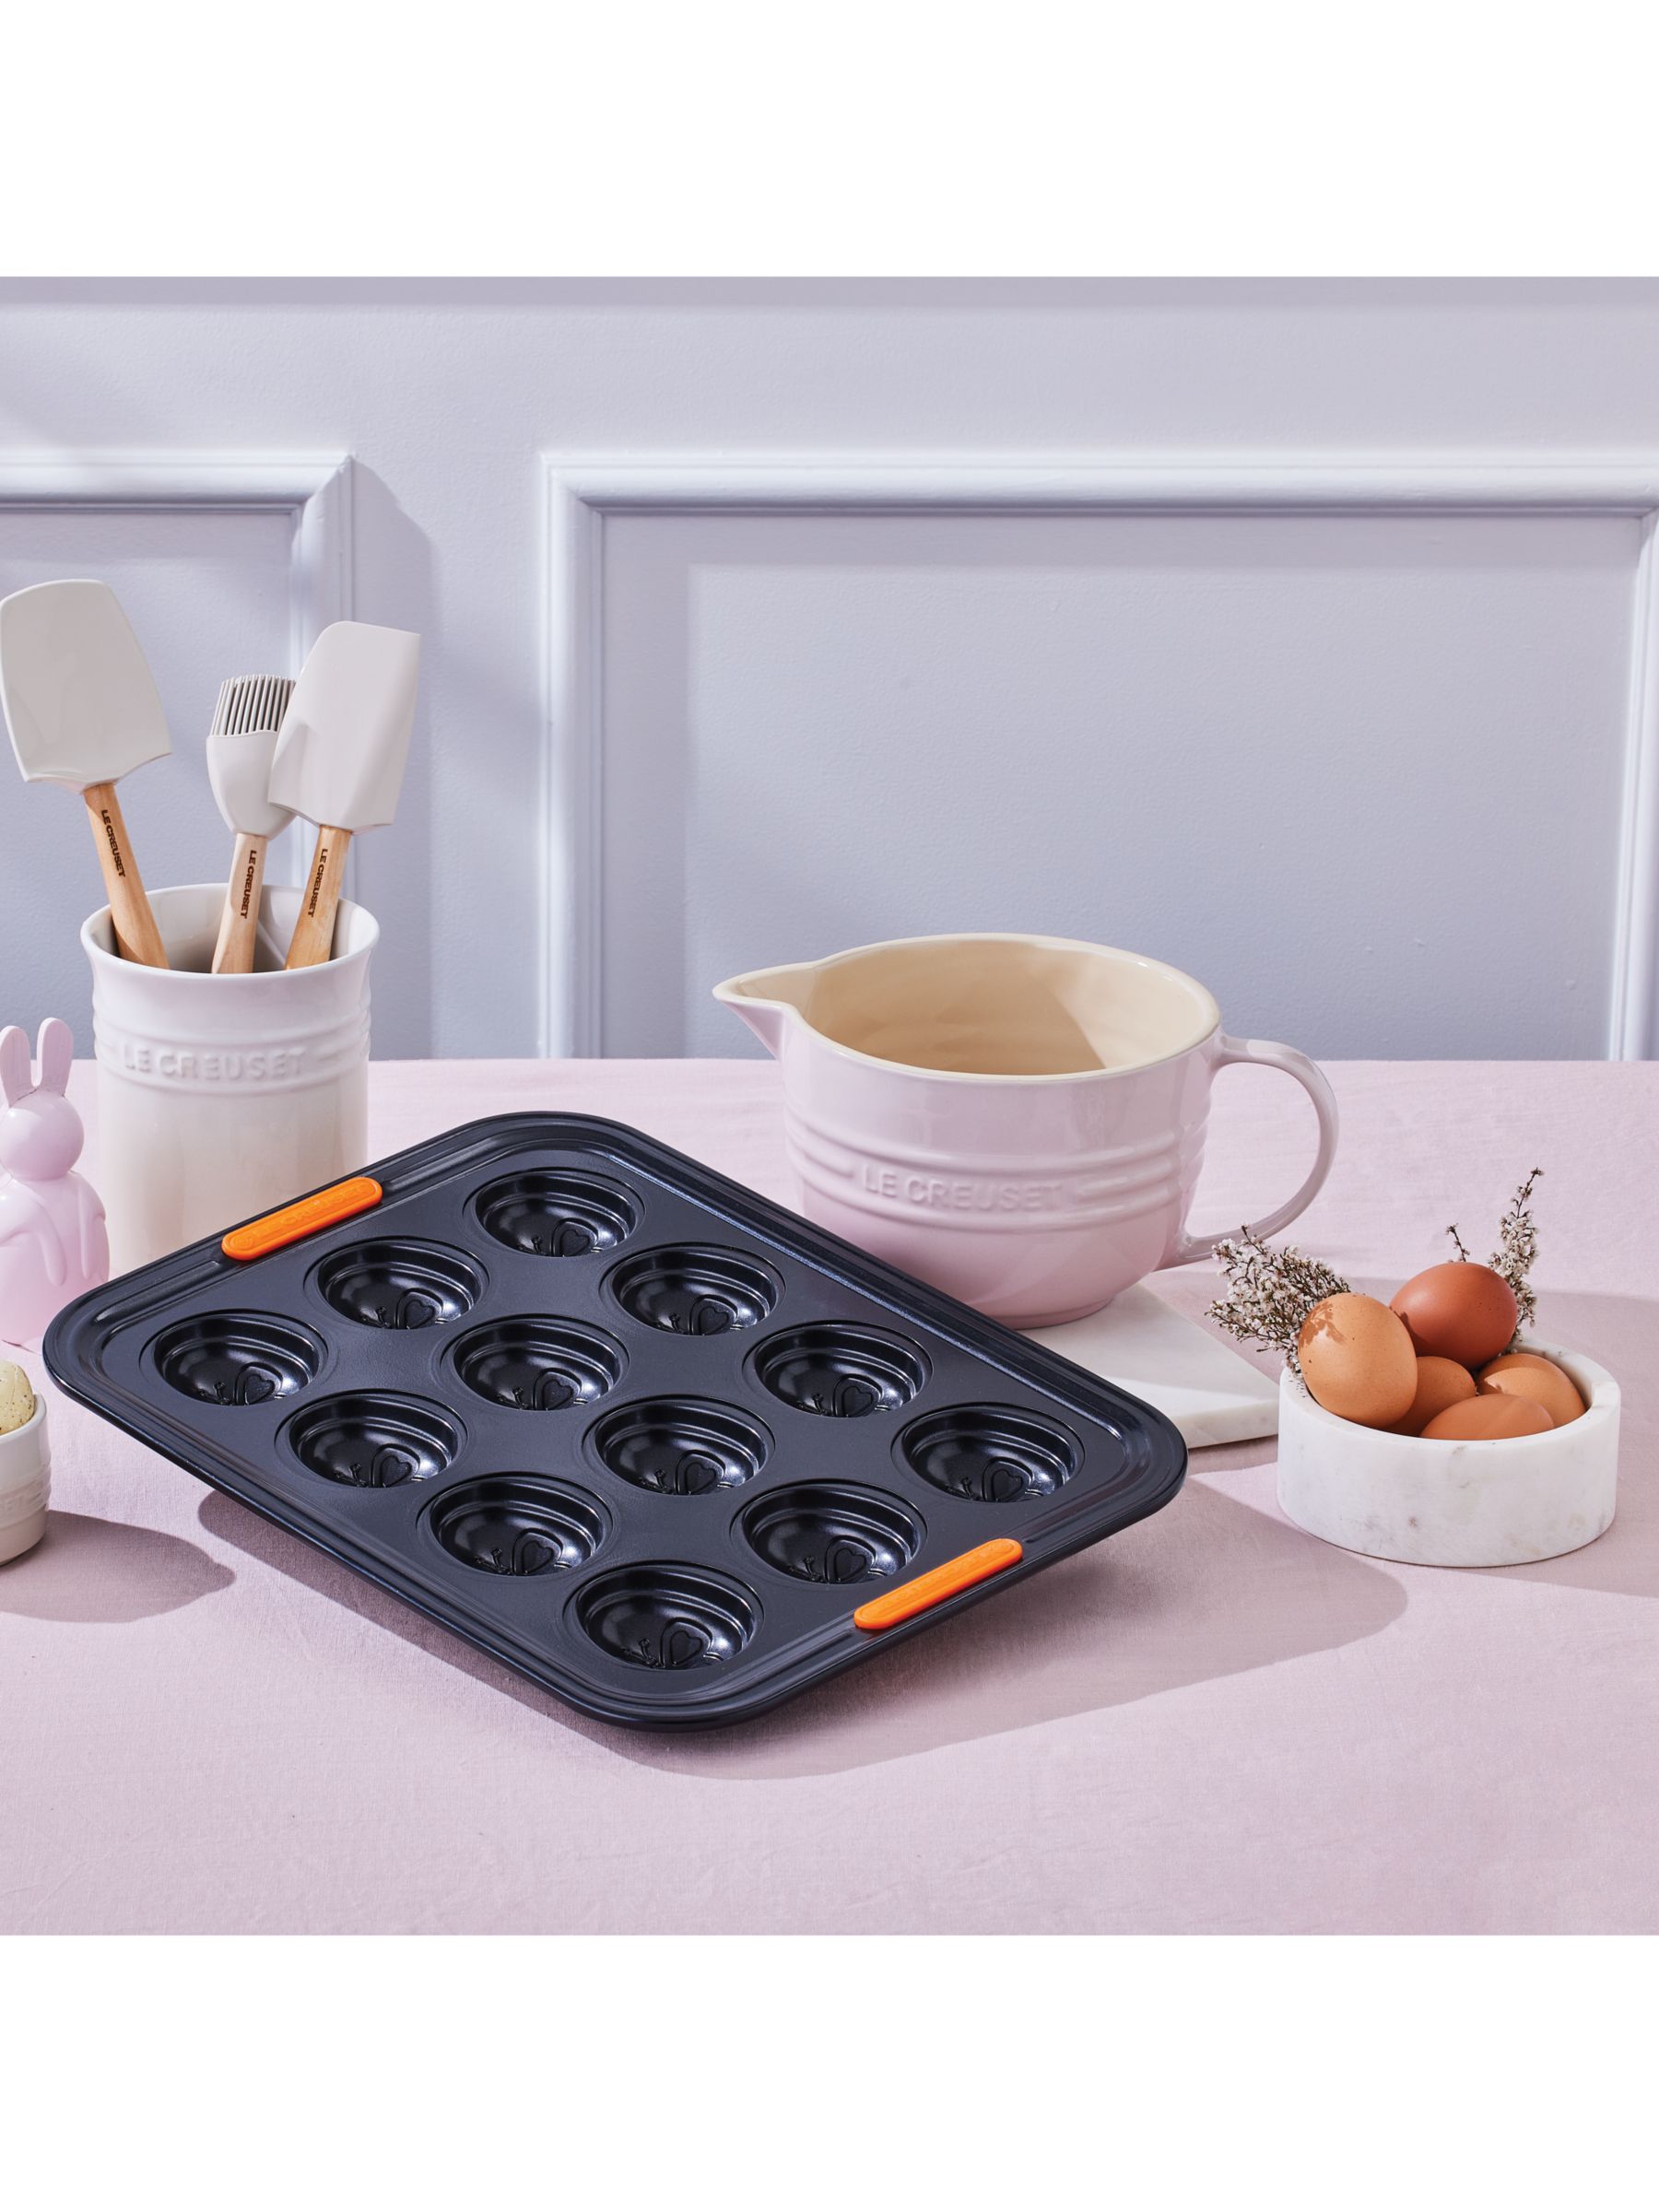 New Le Creuset Bakeware Toughened Non-Stick 12 Cup Star Shaped Baking Tray